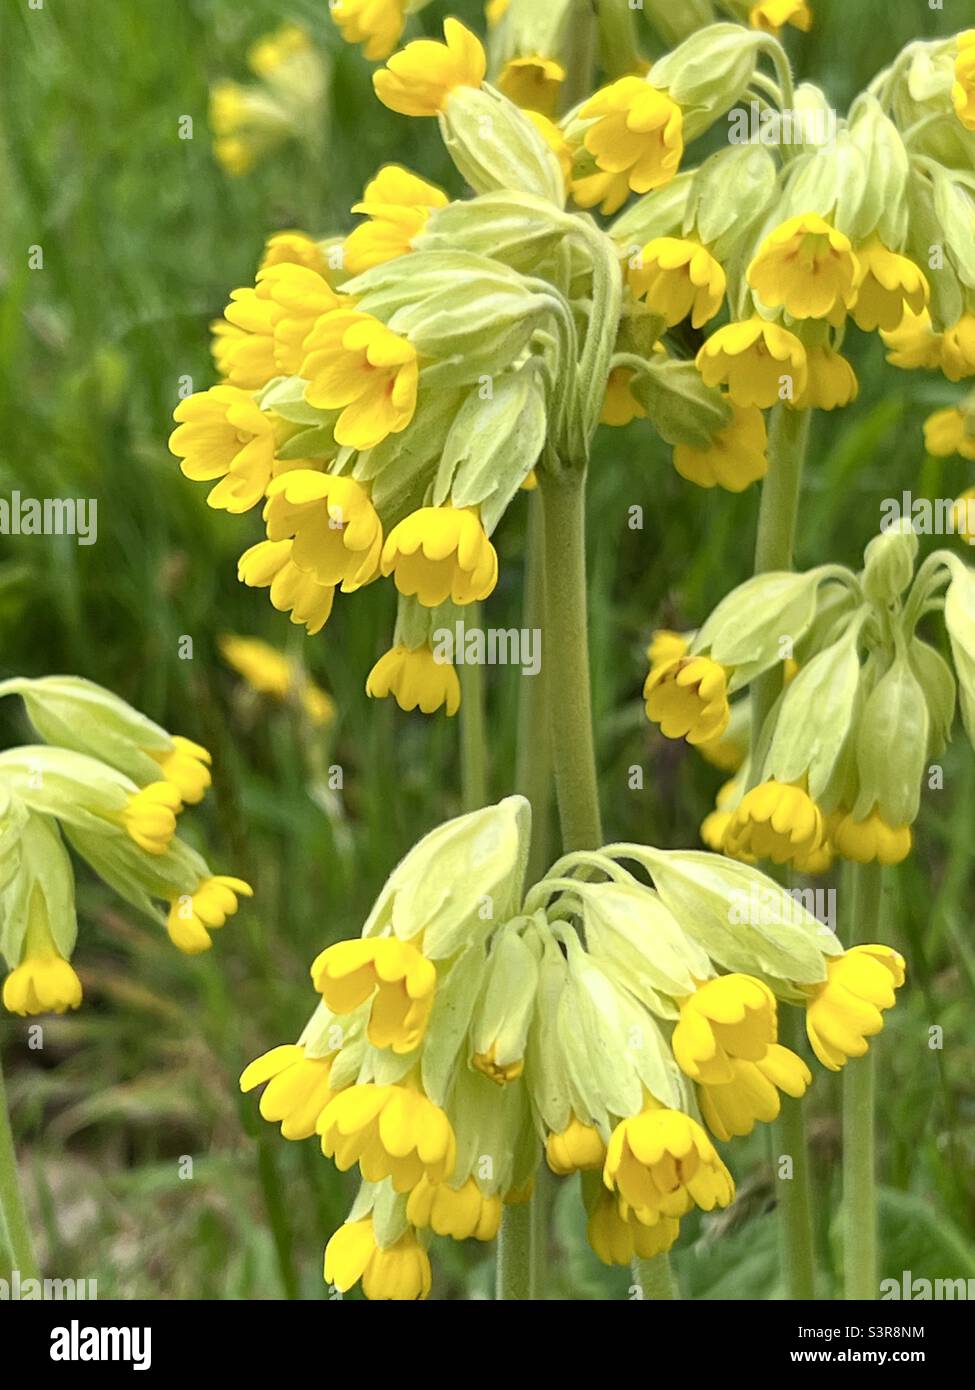 Primula veris, or Common cowslip flowering in May Stock Photo